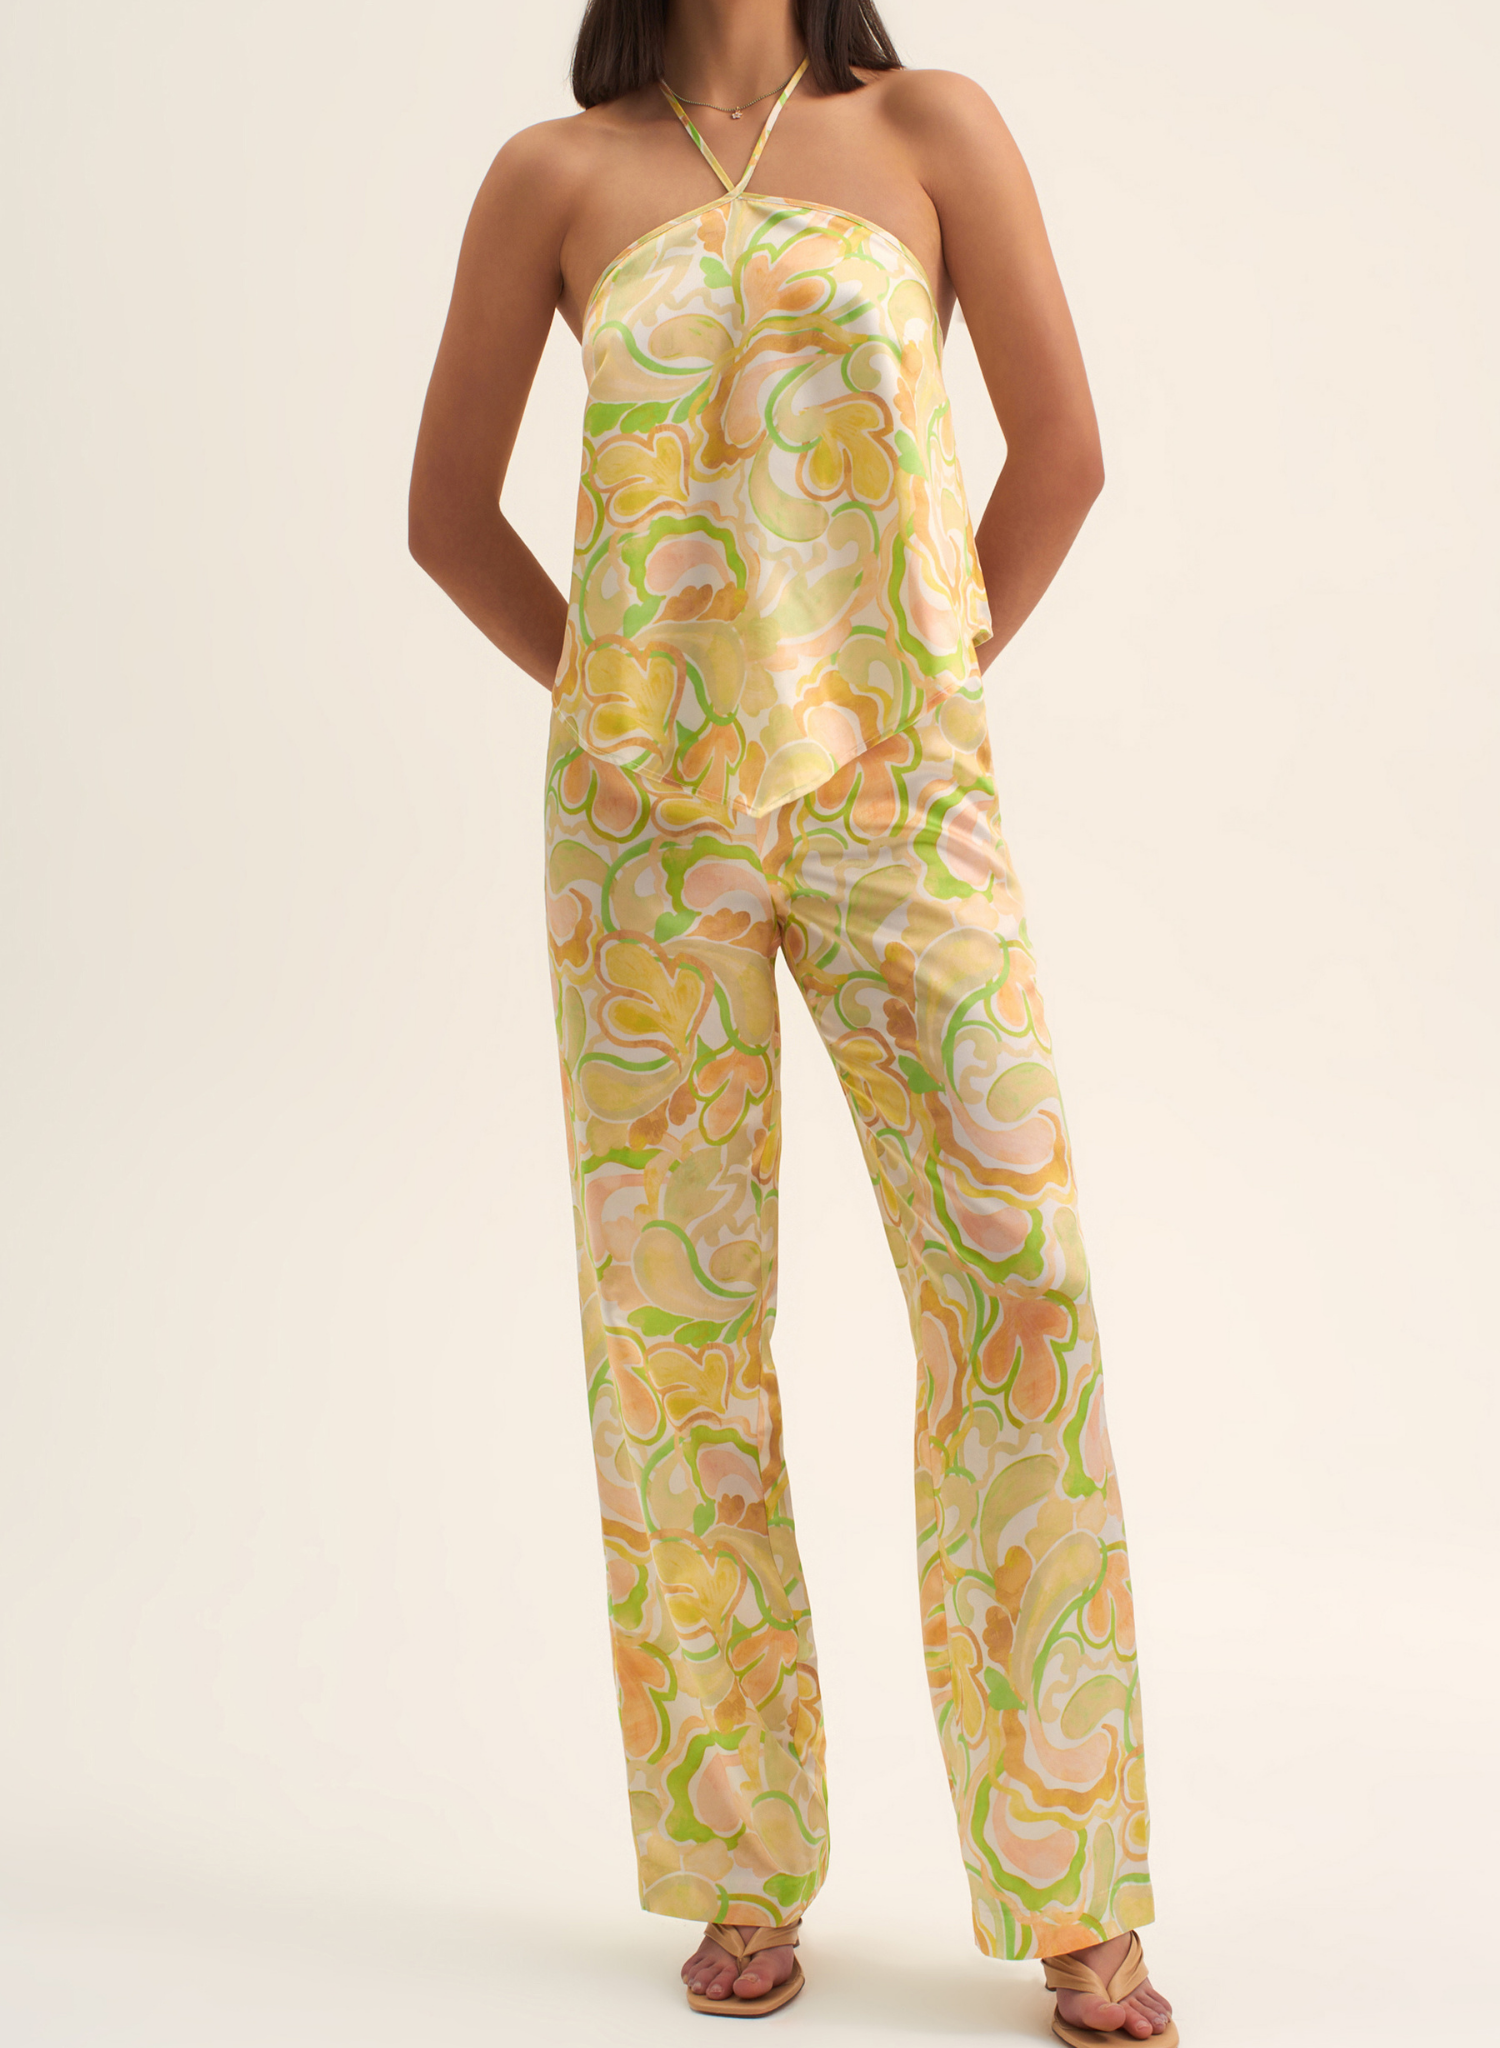 The Cassia Pant is a classic cut straight leg pant. The statement print makes this the perfect piece to pair back with all your closet staples or go for a matching look with the Della Halter